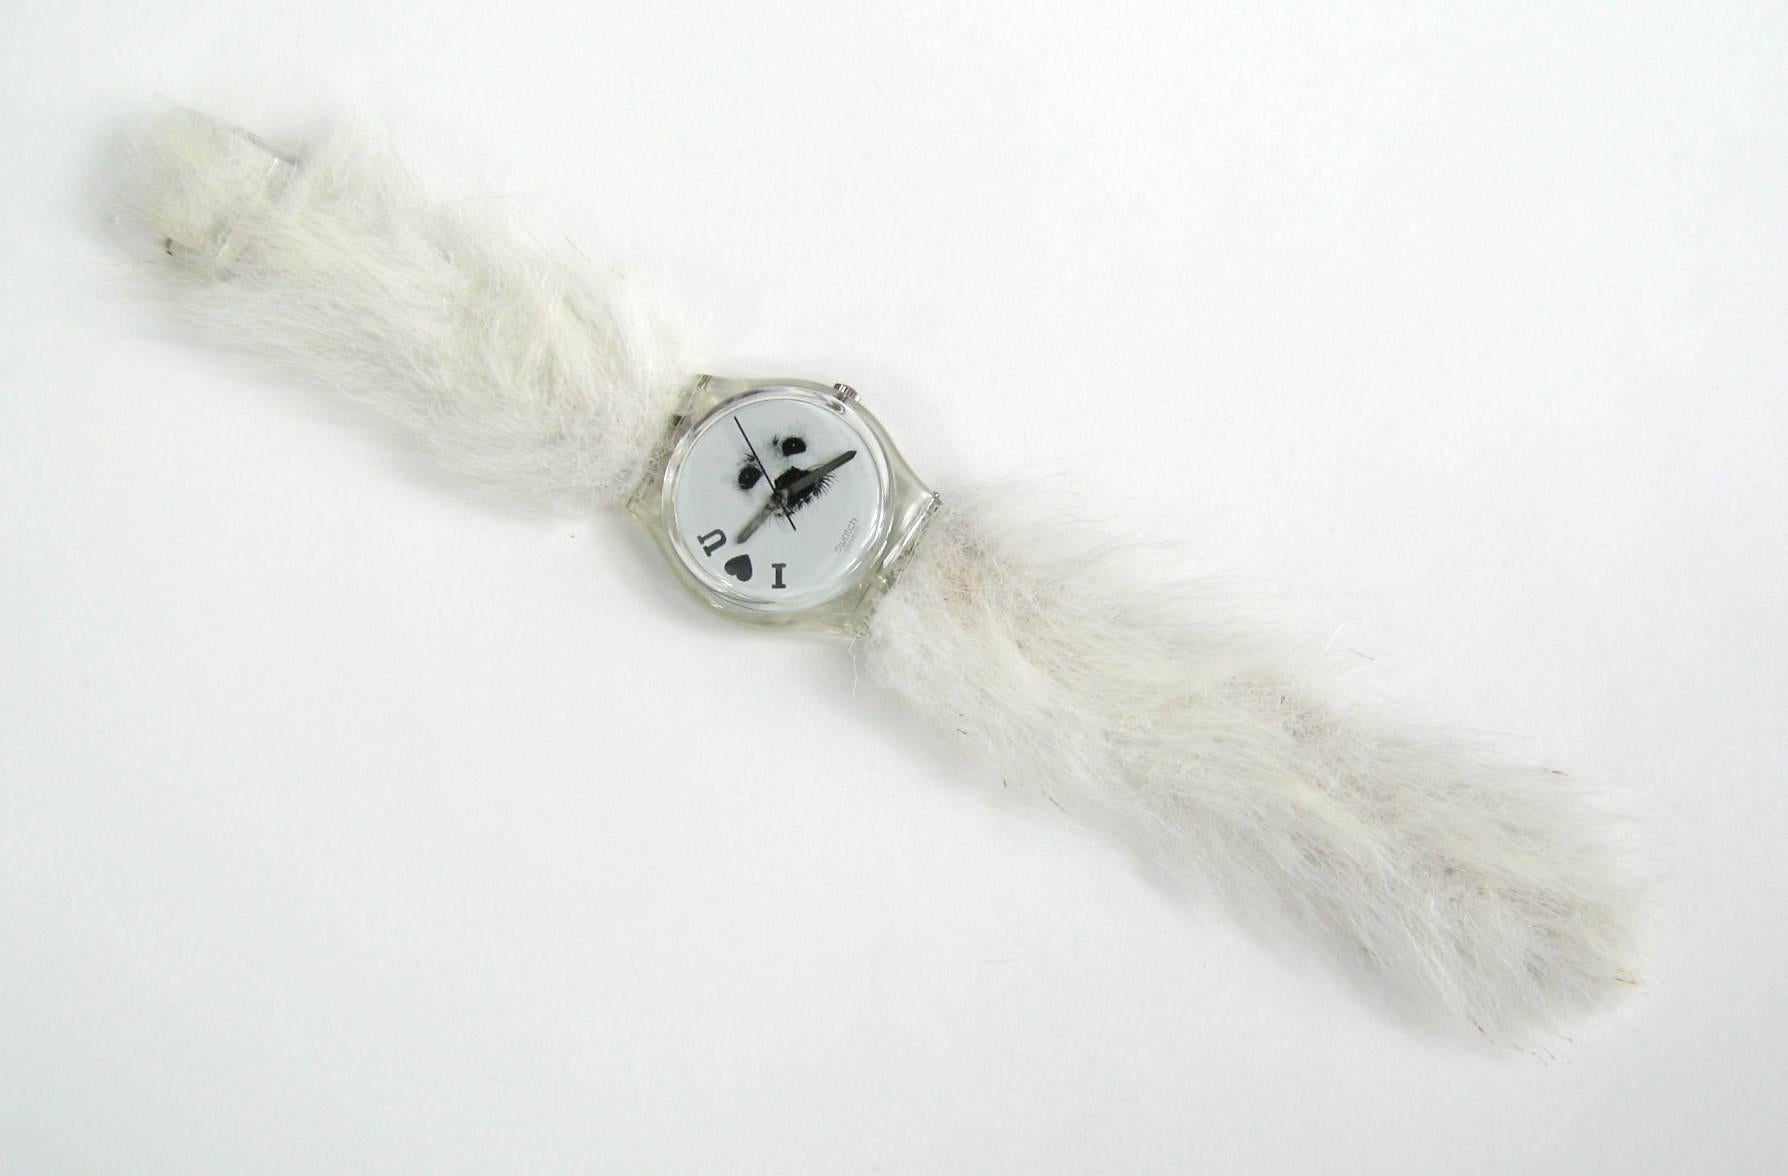 This is a rare collectible Swatch Watch called Frozen Tears Save the seals. It is a prototype. It is no longer available and very hard to find. It is a very unique Swatch that no one has. It is a Prototype. New never worn. Many more swatch watches